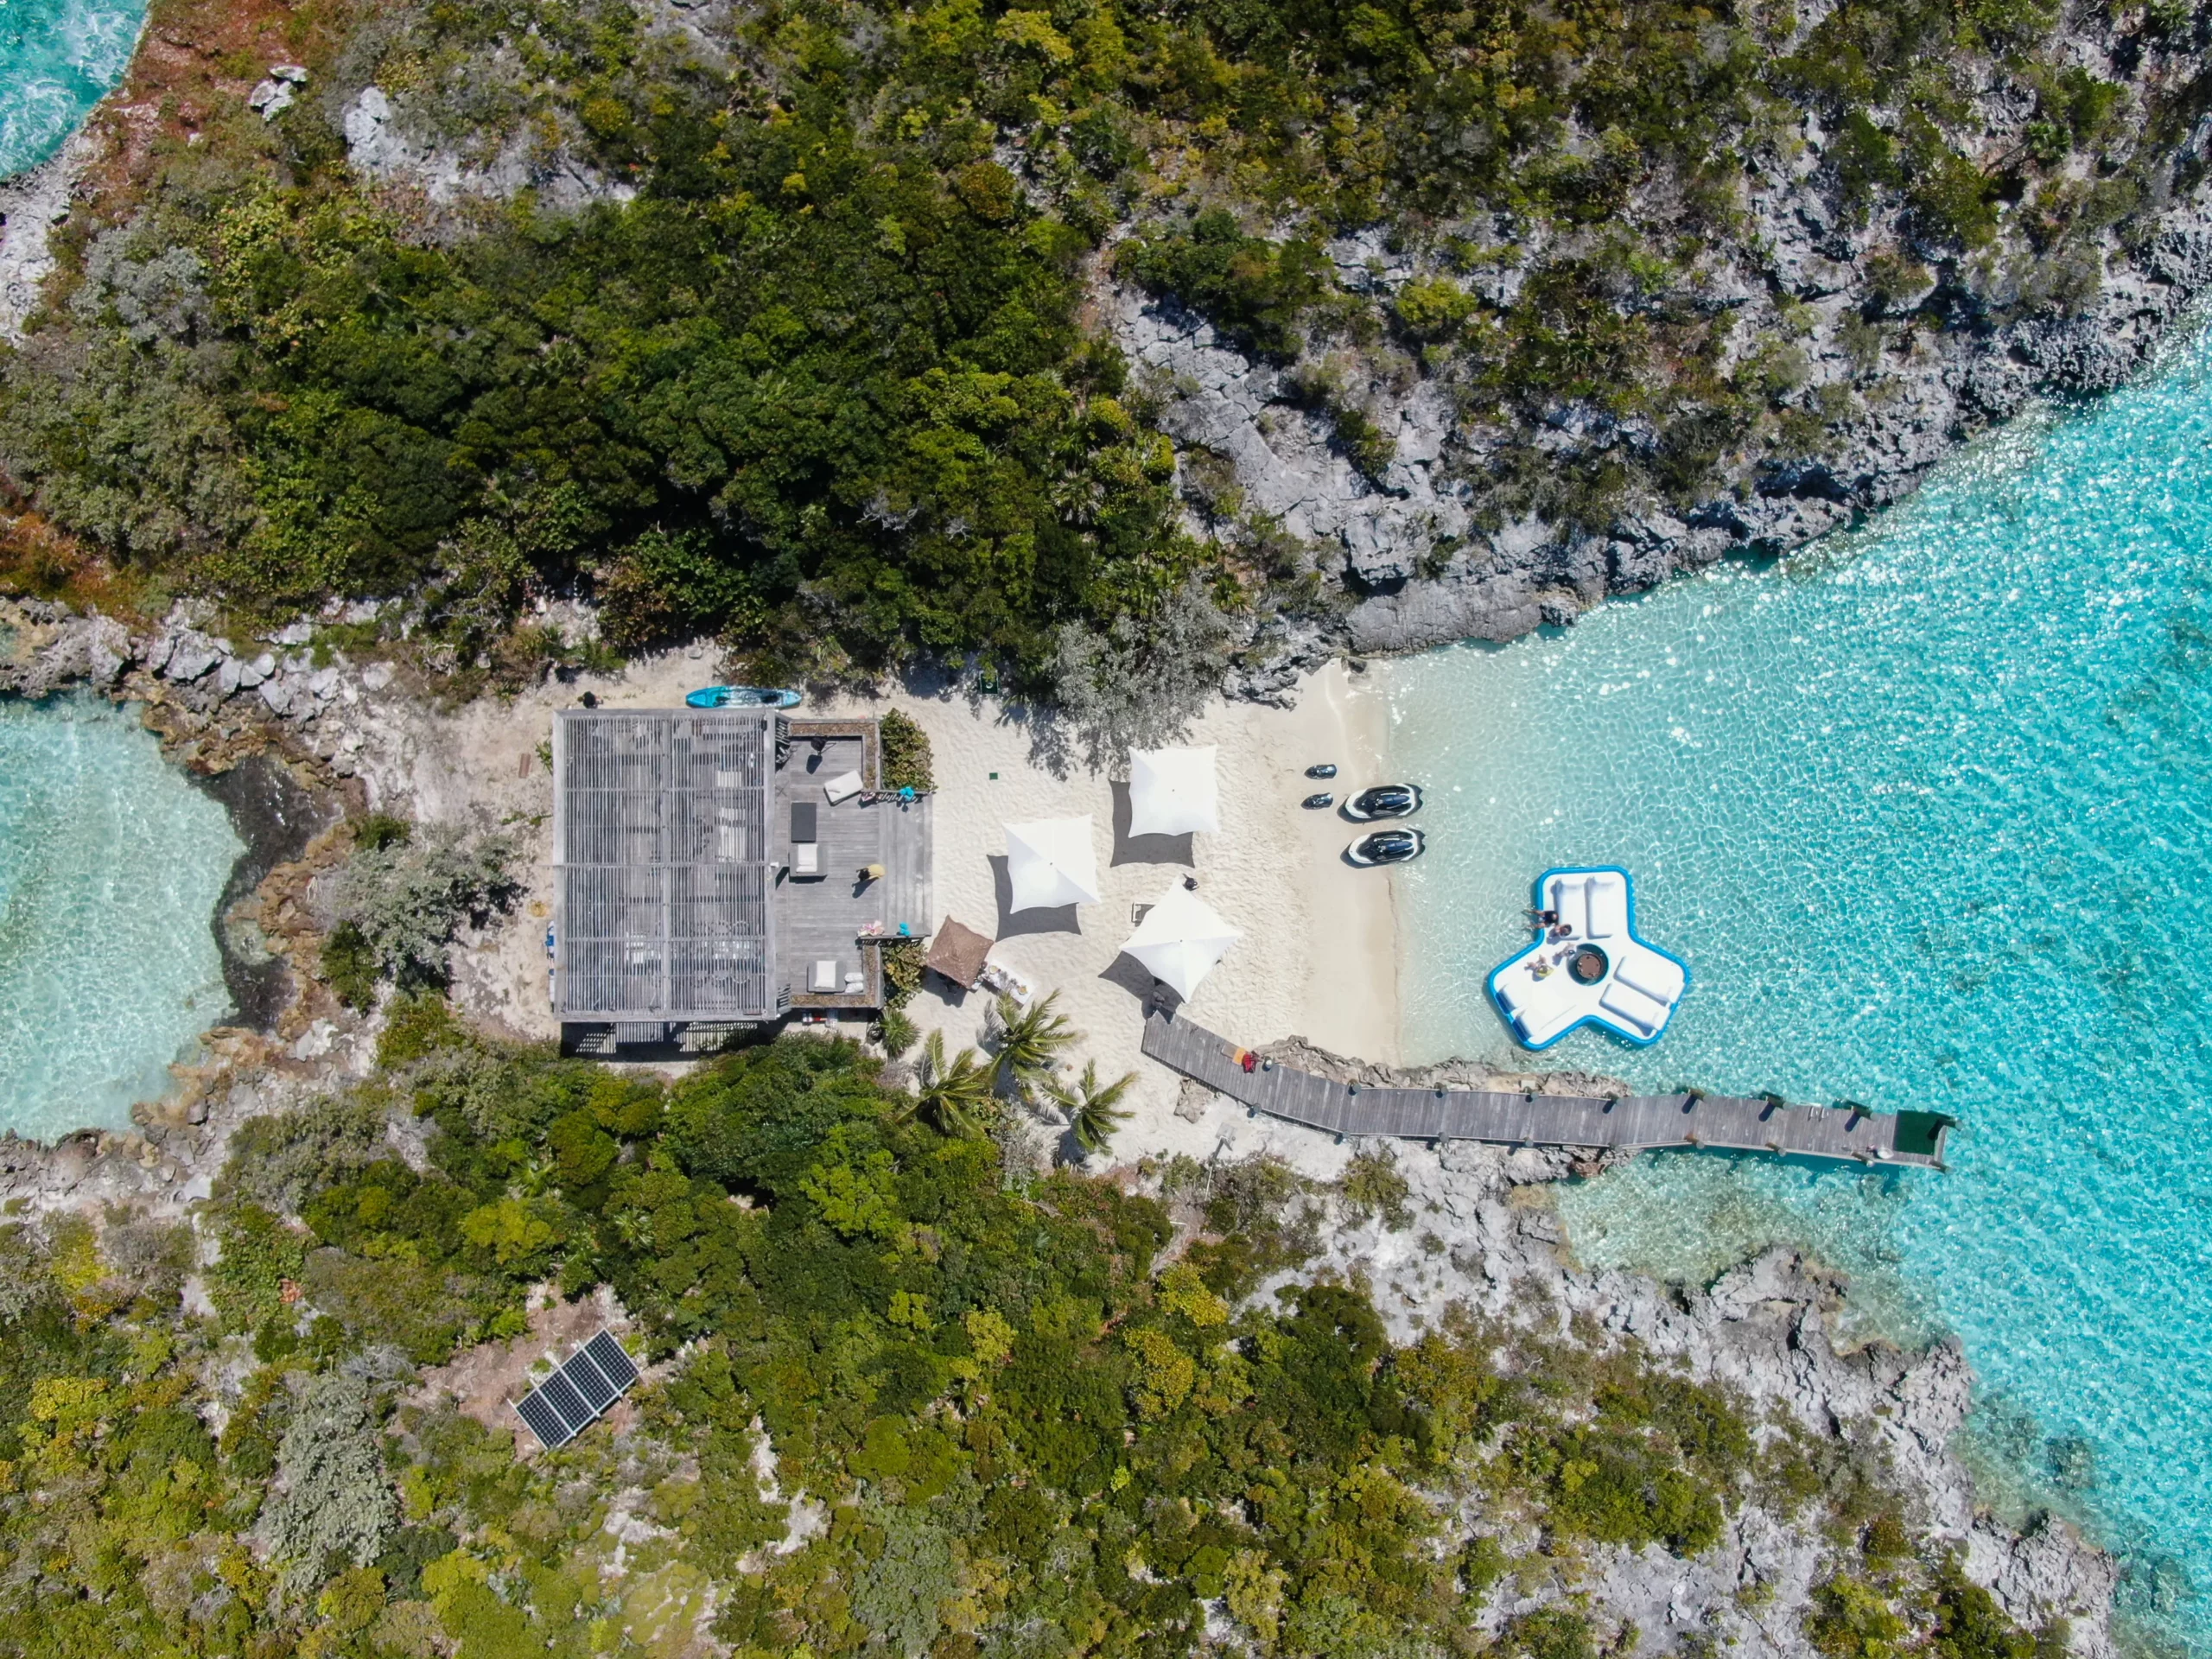 Drone view of the Floating Island from Motor Yacht Broadwater